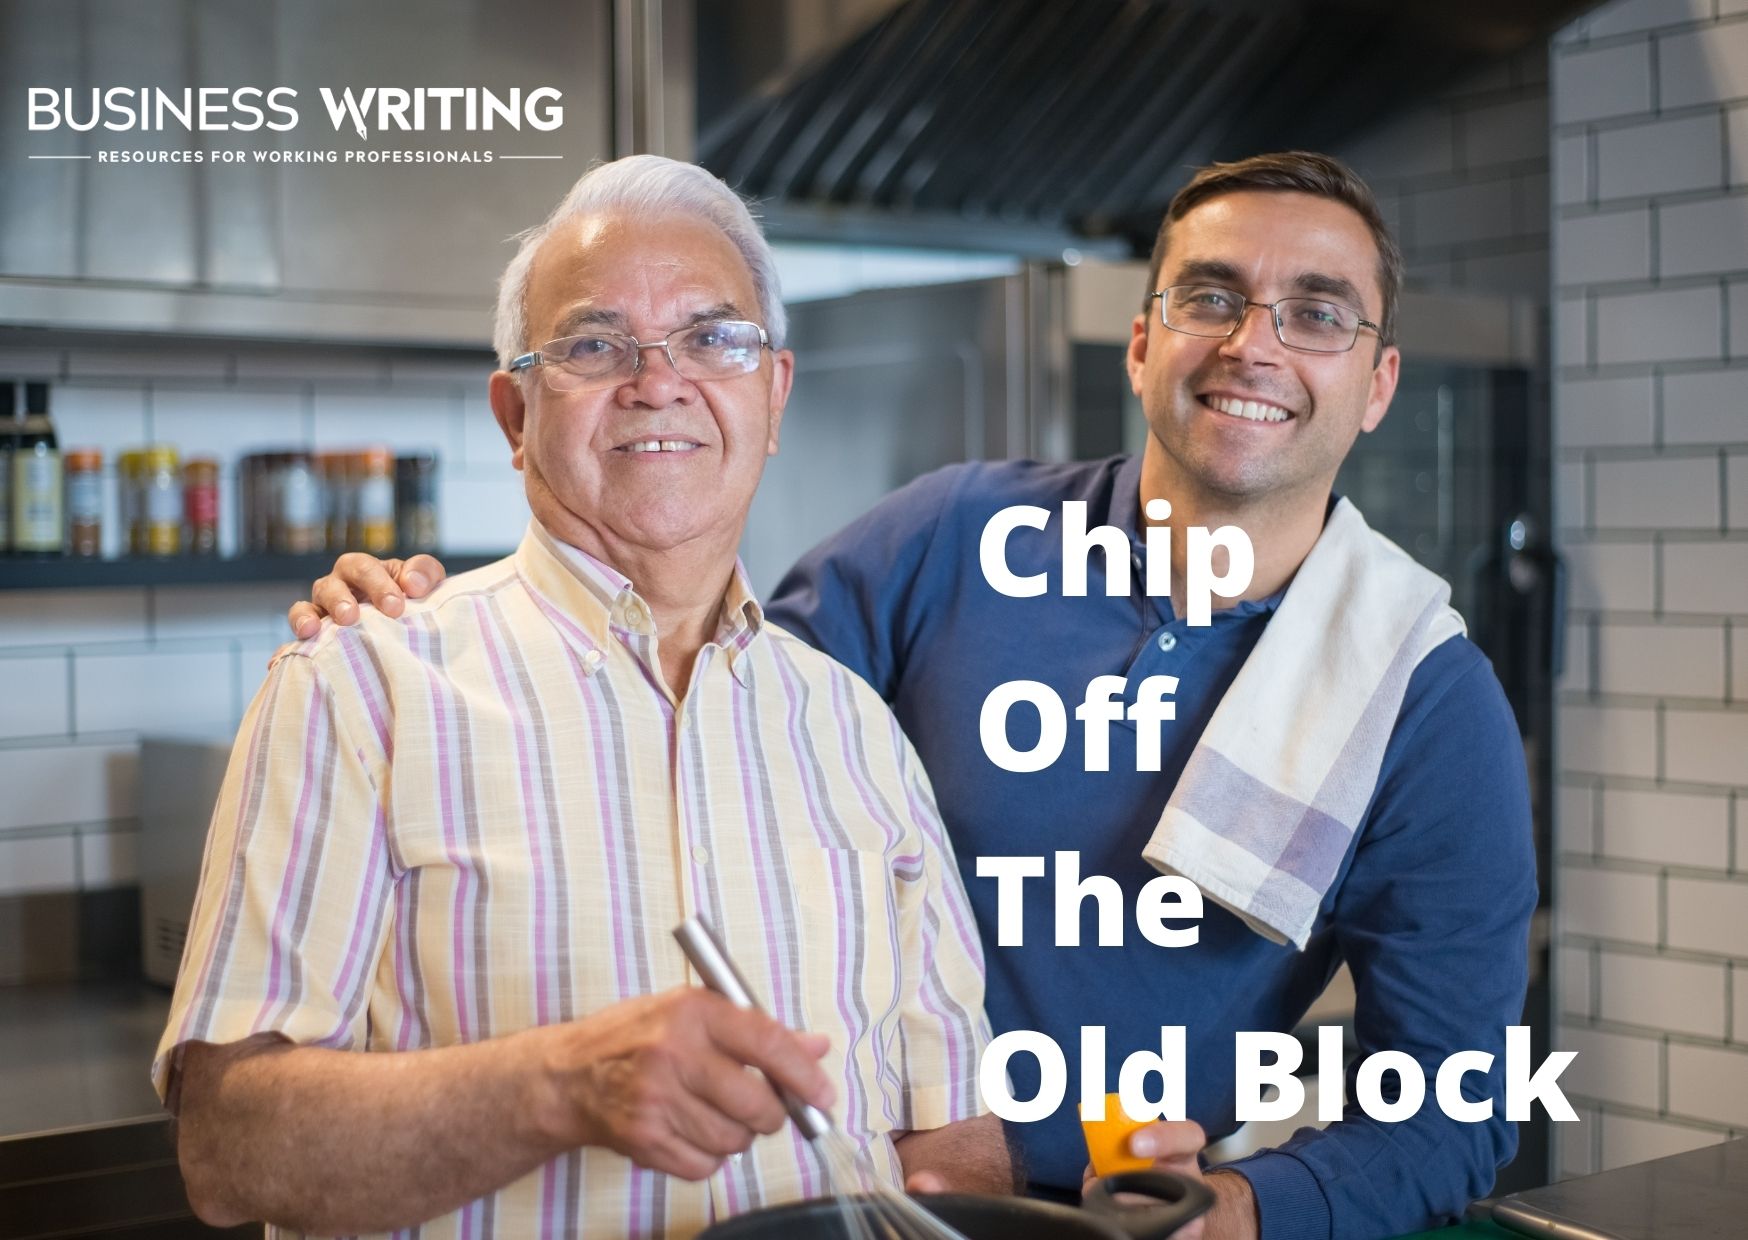 A picture of father and son cooking with the phrase "Chip Off The Old Block"